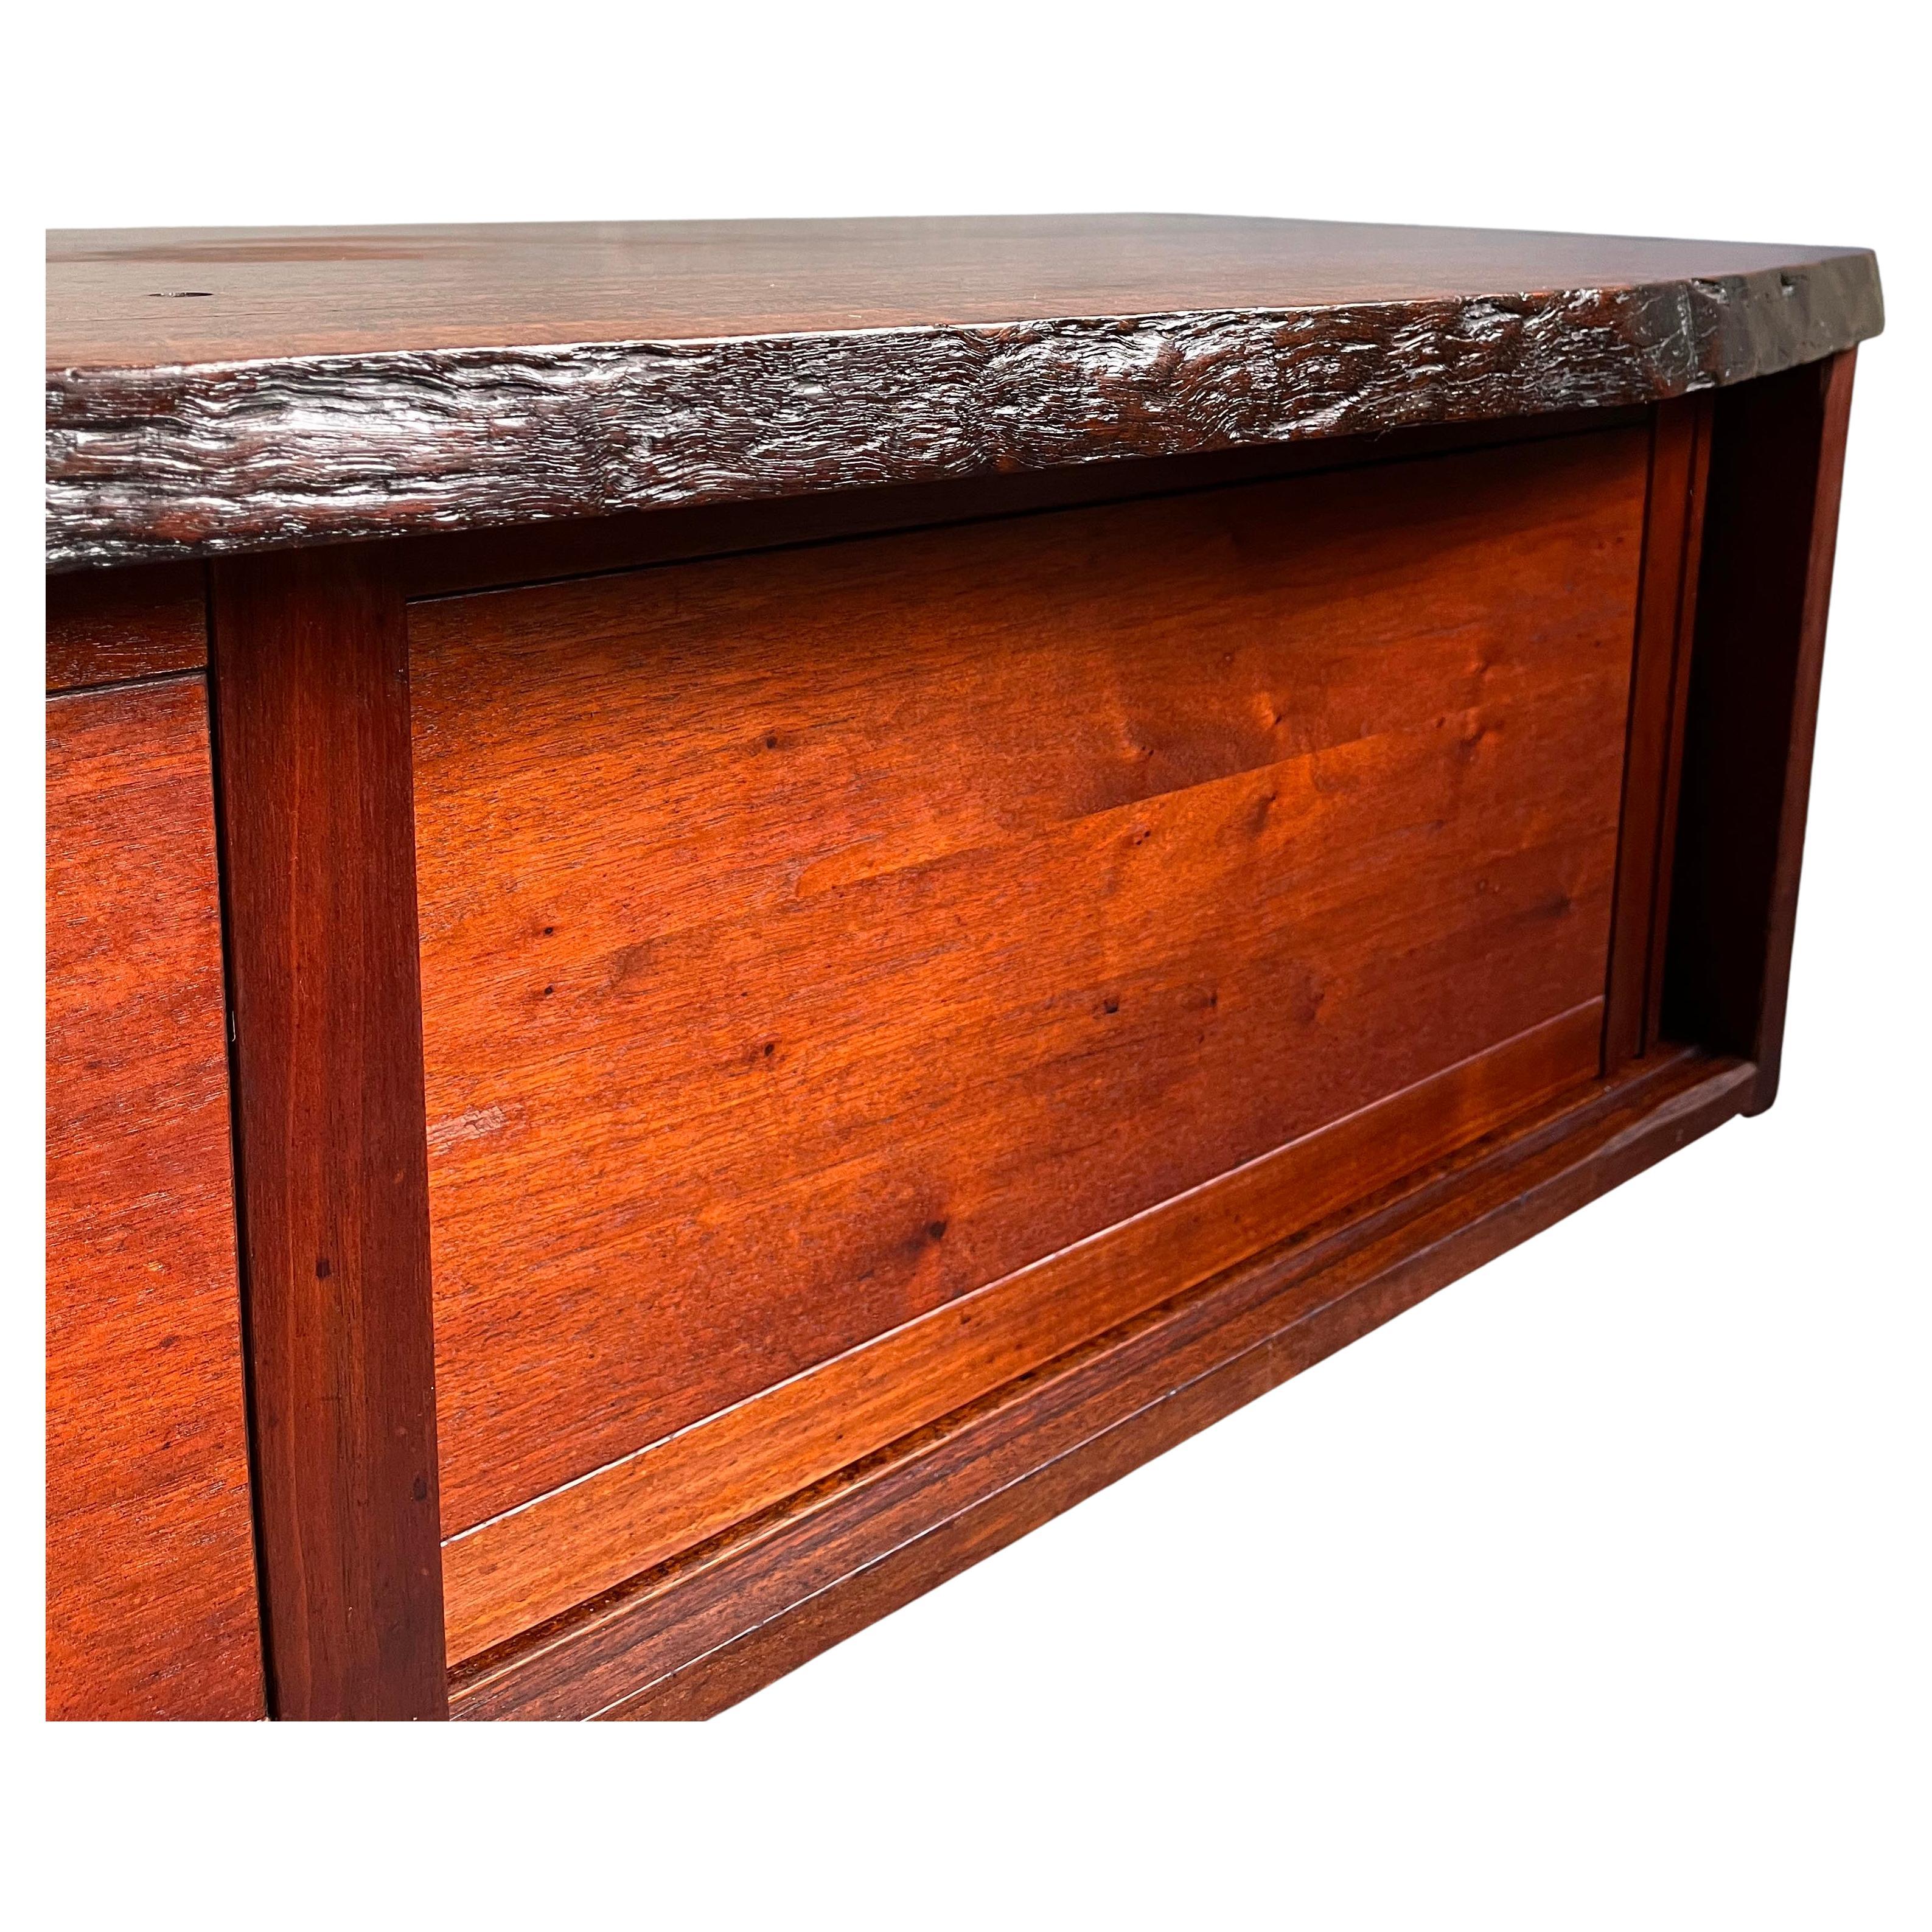 Gorgeous George Nakashima cabinet features a single slab laurel top with one free edge above two doors concealing two adjustable shelves. Perfect low cabinet also could be a wonderful coffee table. Sold with a digital copy of the original order